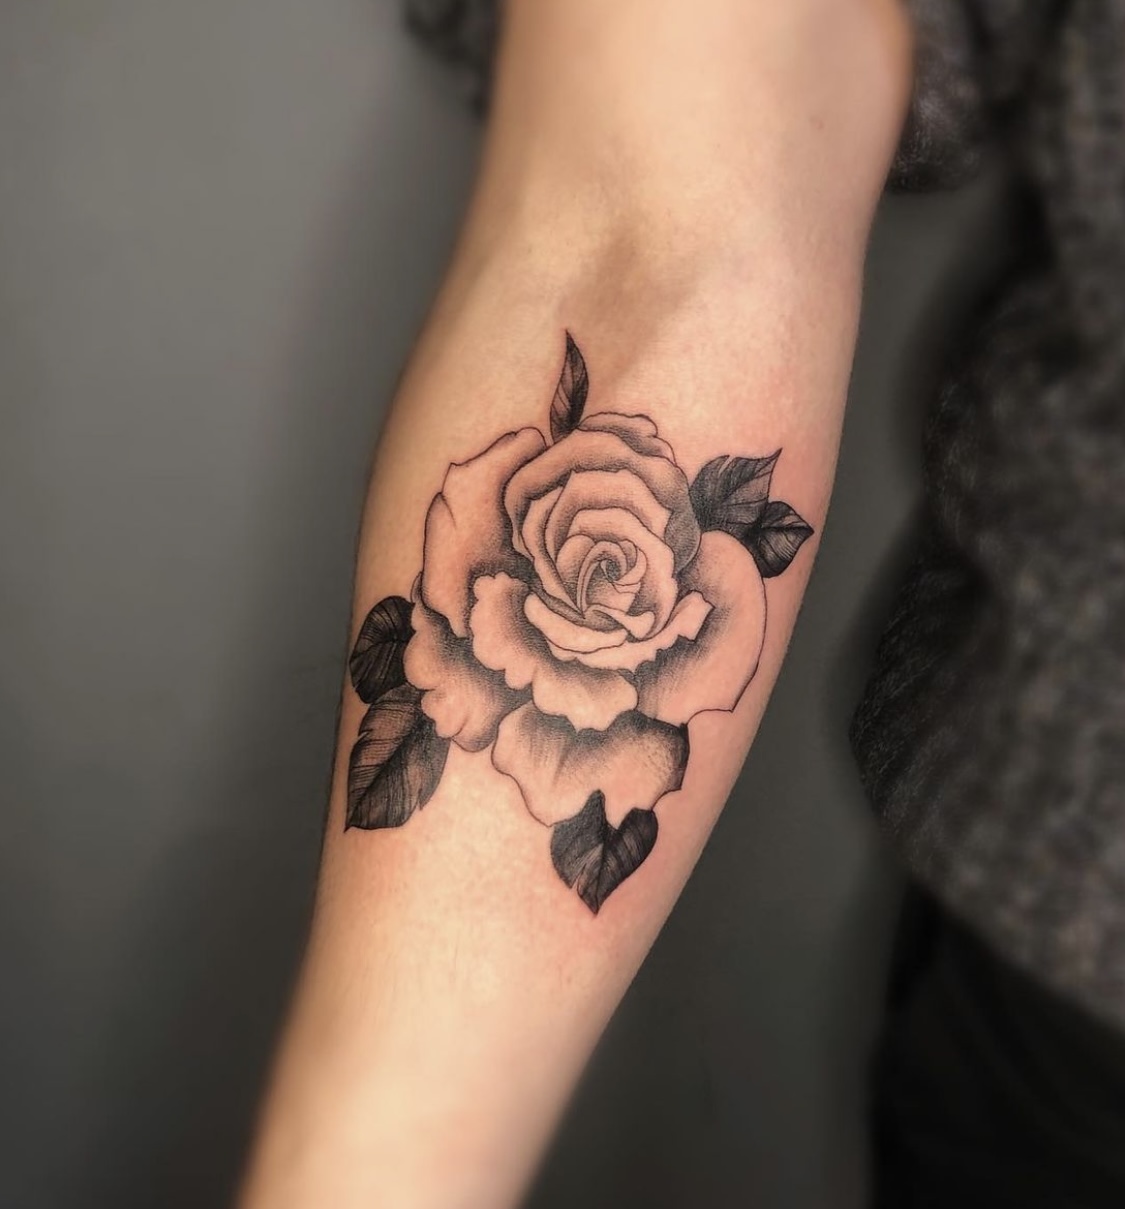 marcellaink tattoo rosee